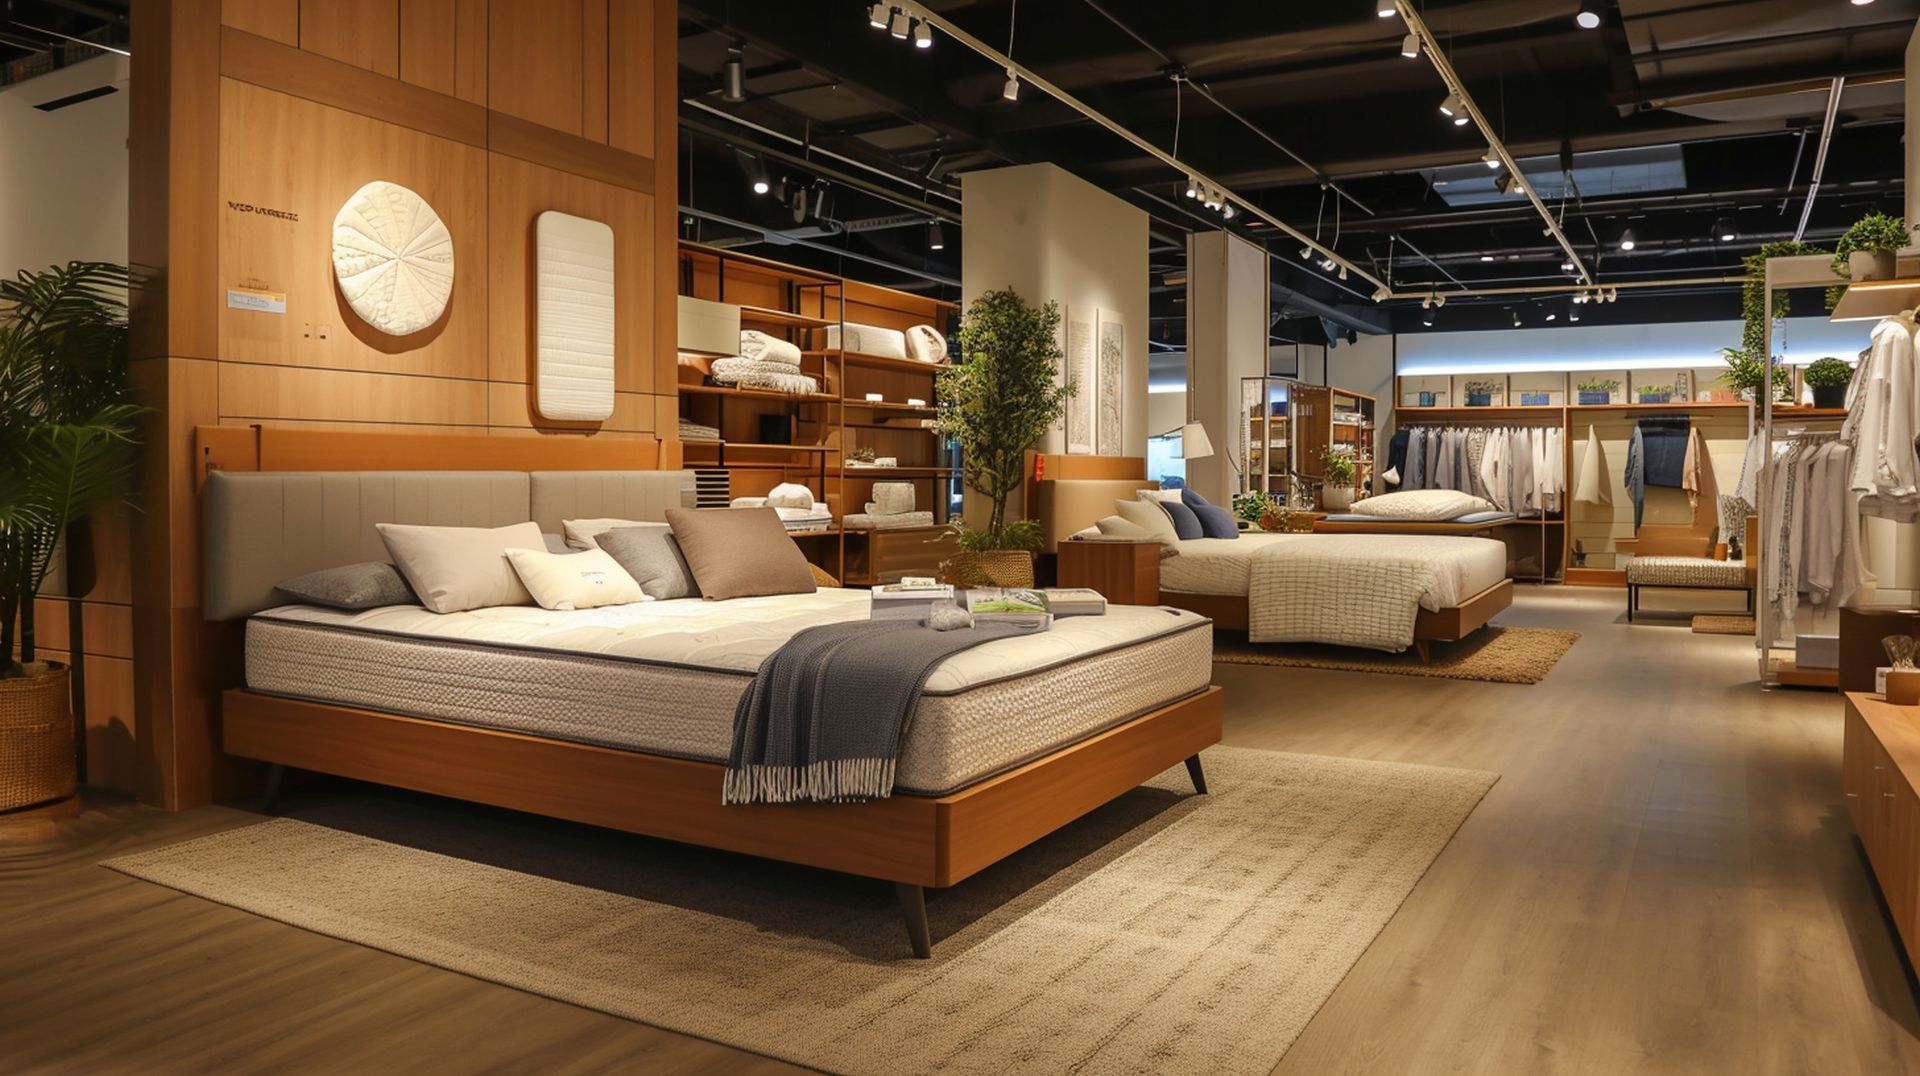 If you're looking for a new bed, mattress stores in Sioux Falls offer the best customer and delivery service, financing, and warranties in South Dakota